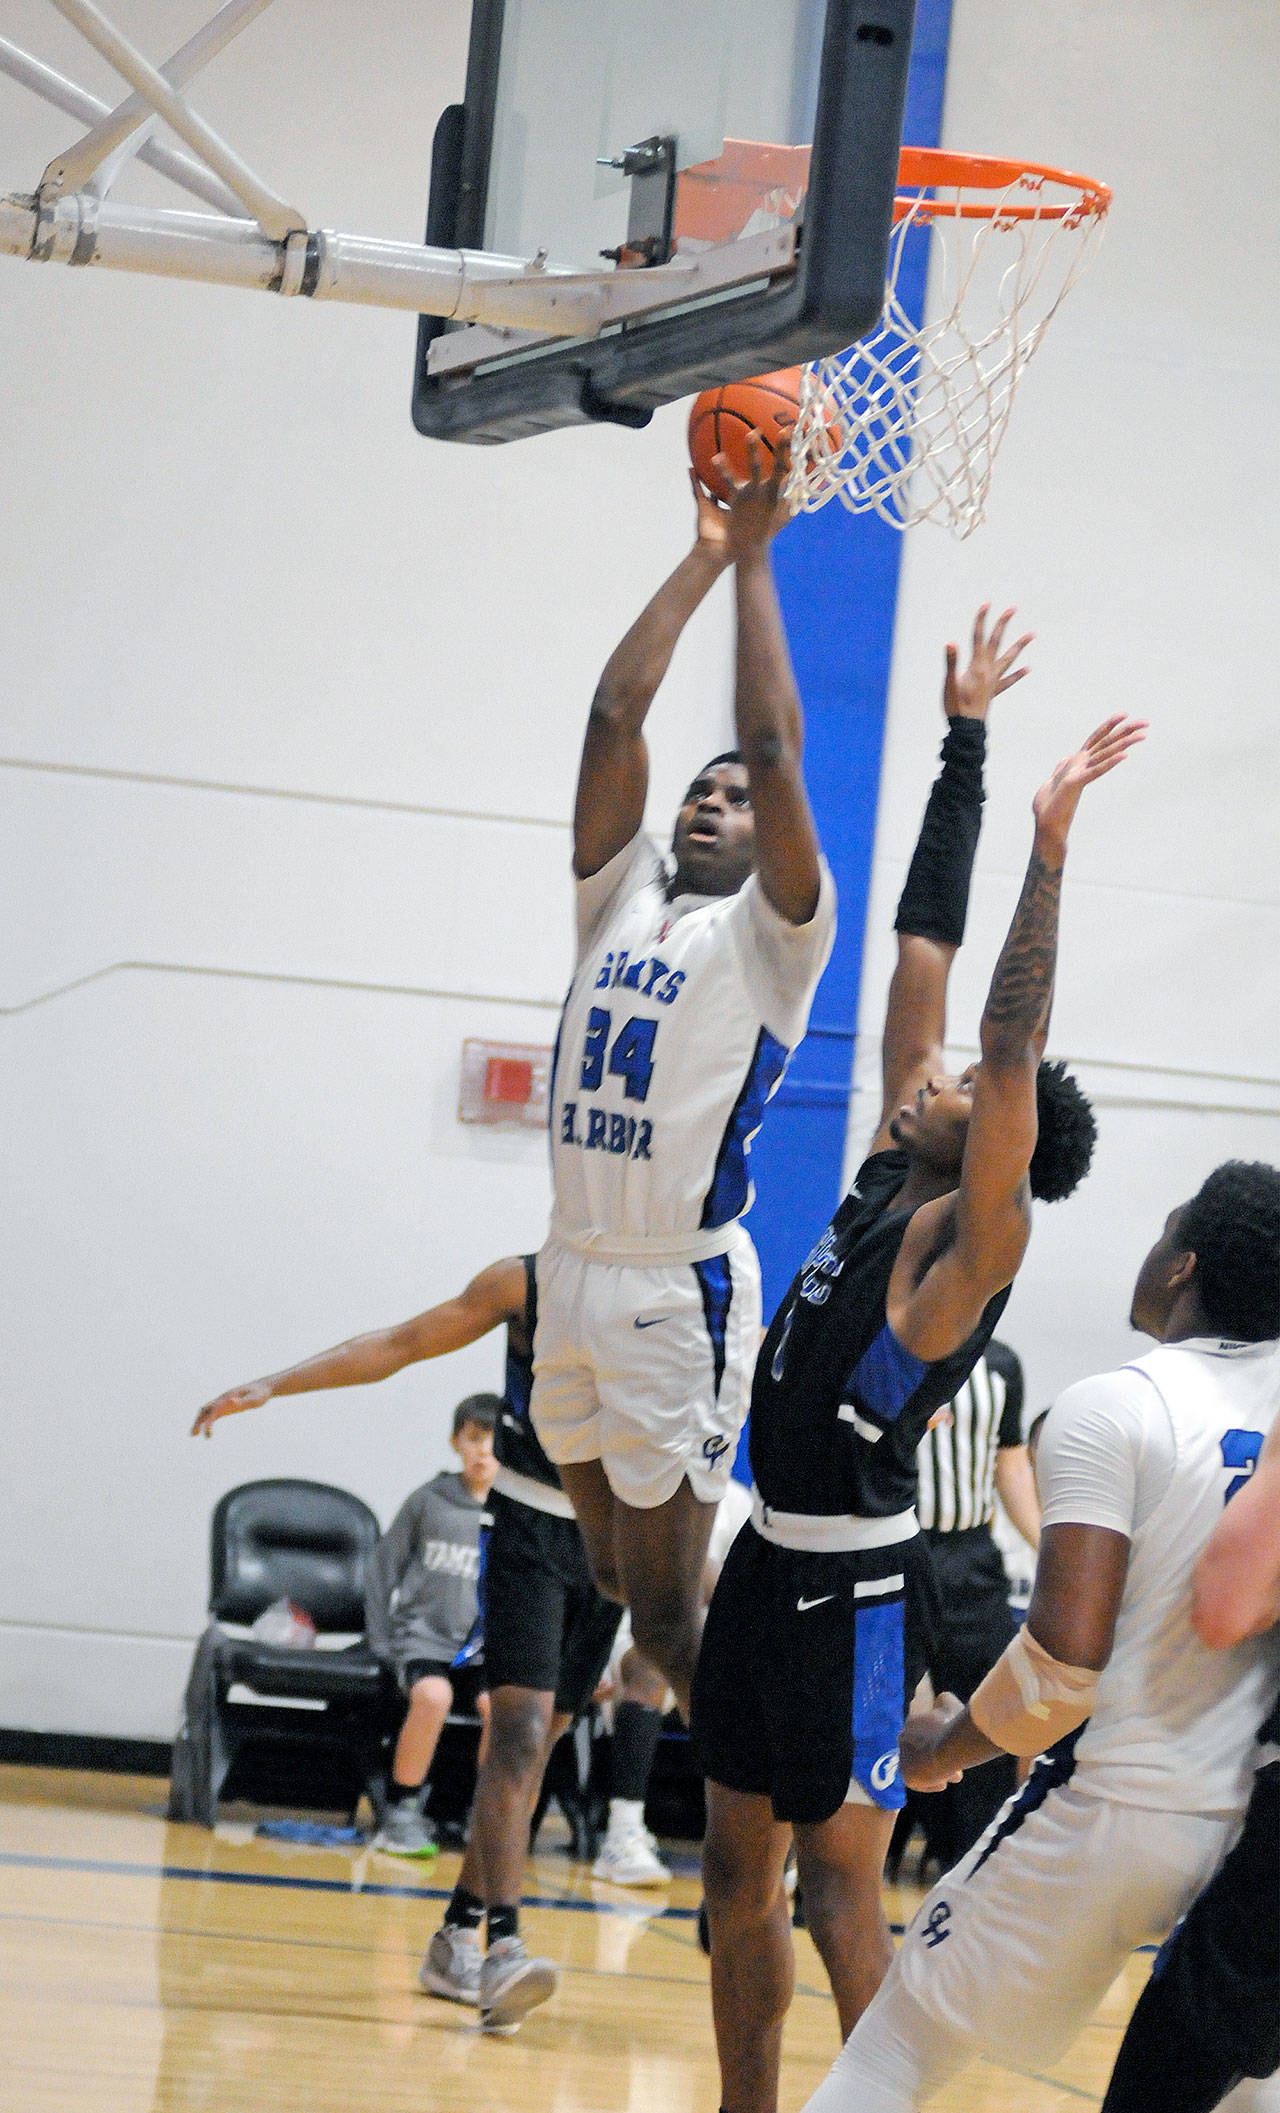 Grays Harbor’s Antoine Hines (34) goes up for a shot while South Puget Sound’s Branden Bunn defends during Saturday’s game in Aberdeen. (Ryan Sparks | Grays Harbor News Group)